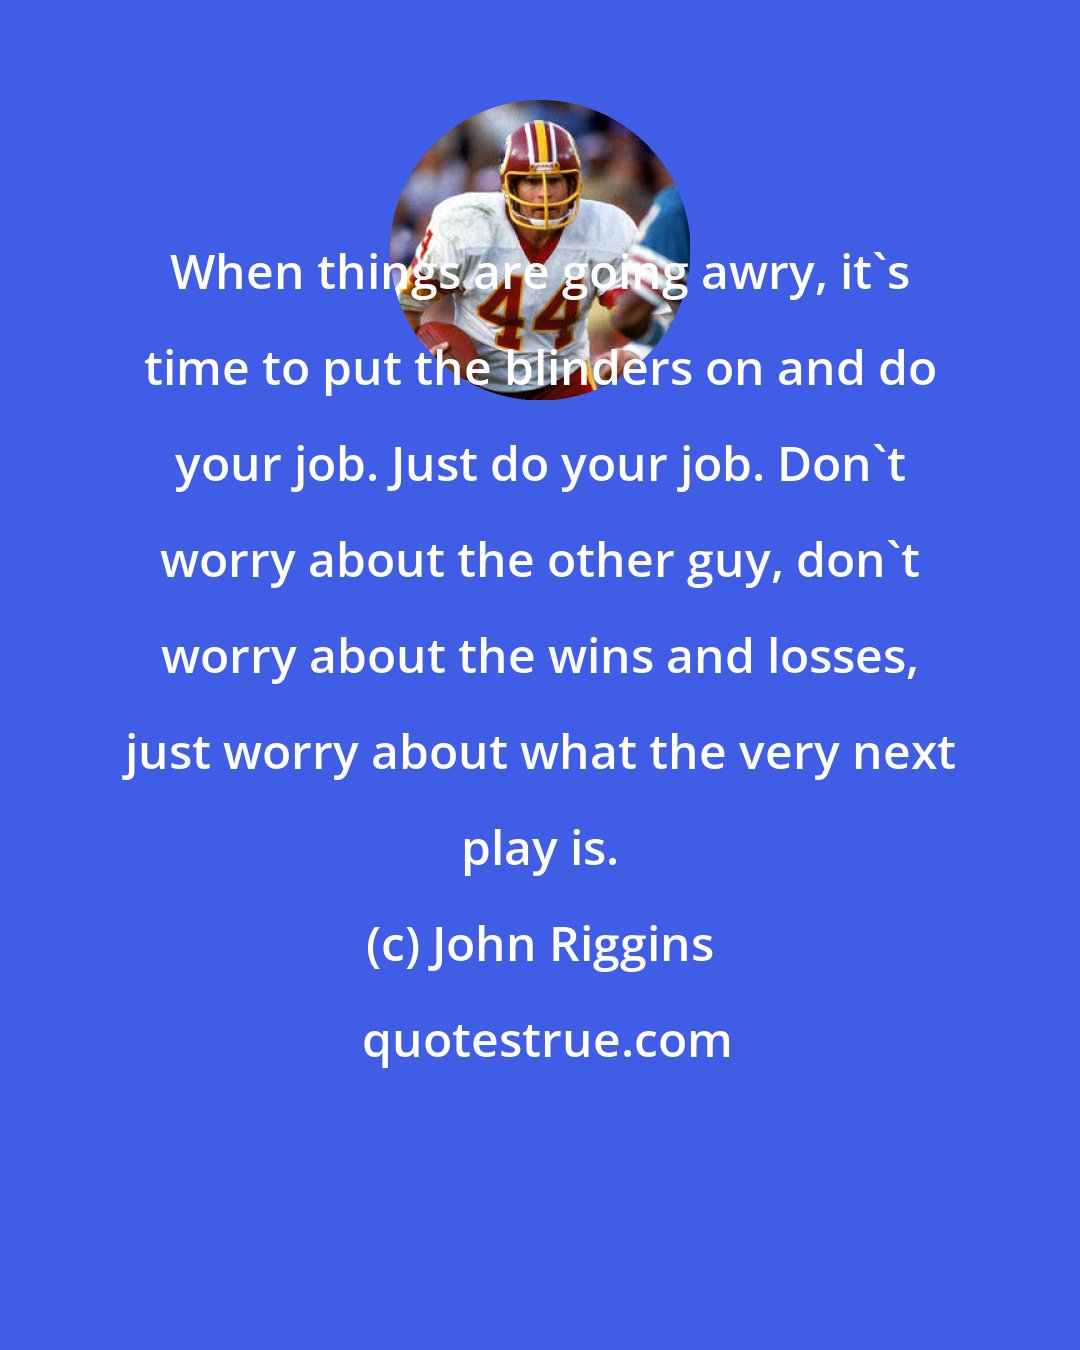 John Riggins: When things are going awry, it's time to put the blinders on and do your job. Just do your job. Don't worry about the other guy, don't worry about the wins and losses, just worry about what the very next play is.